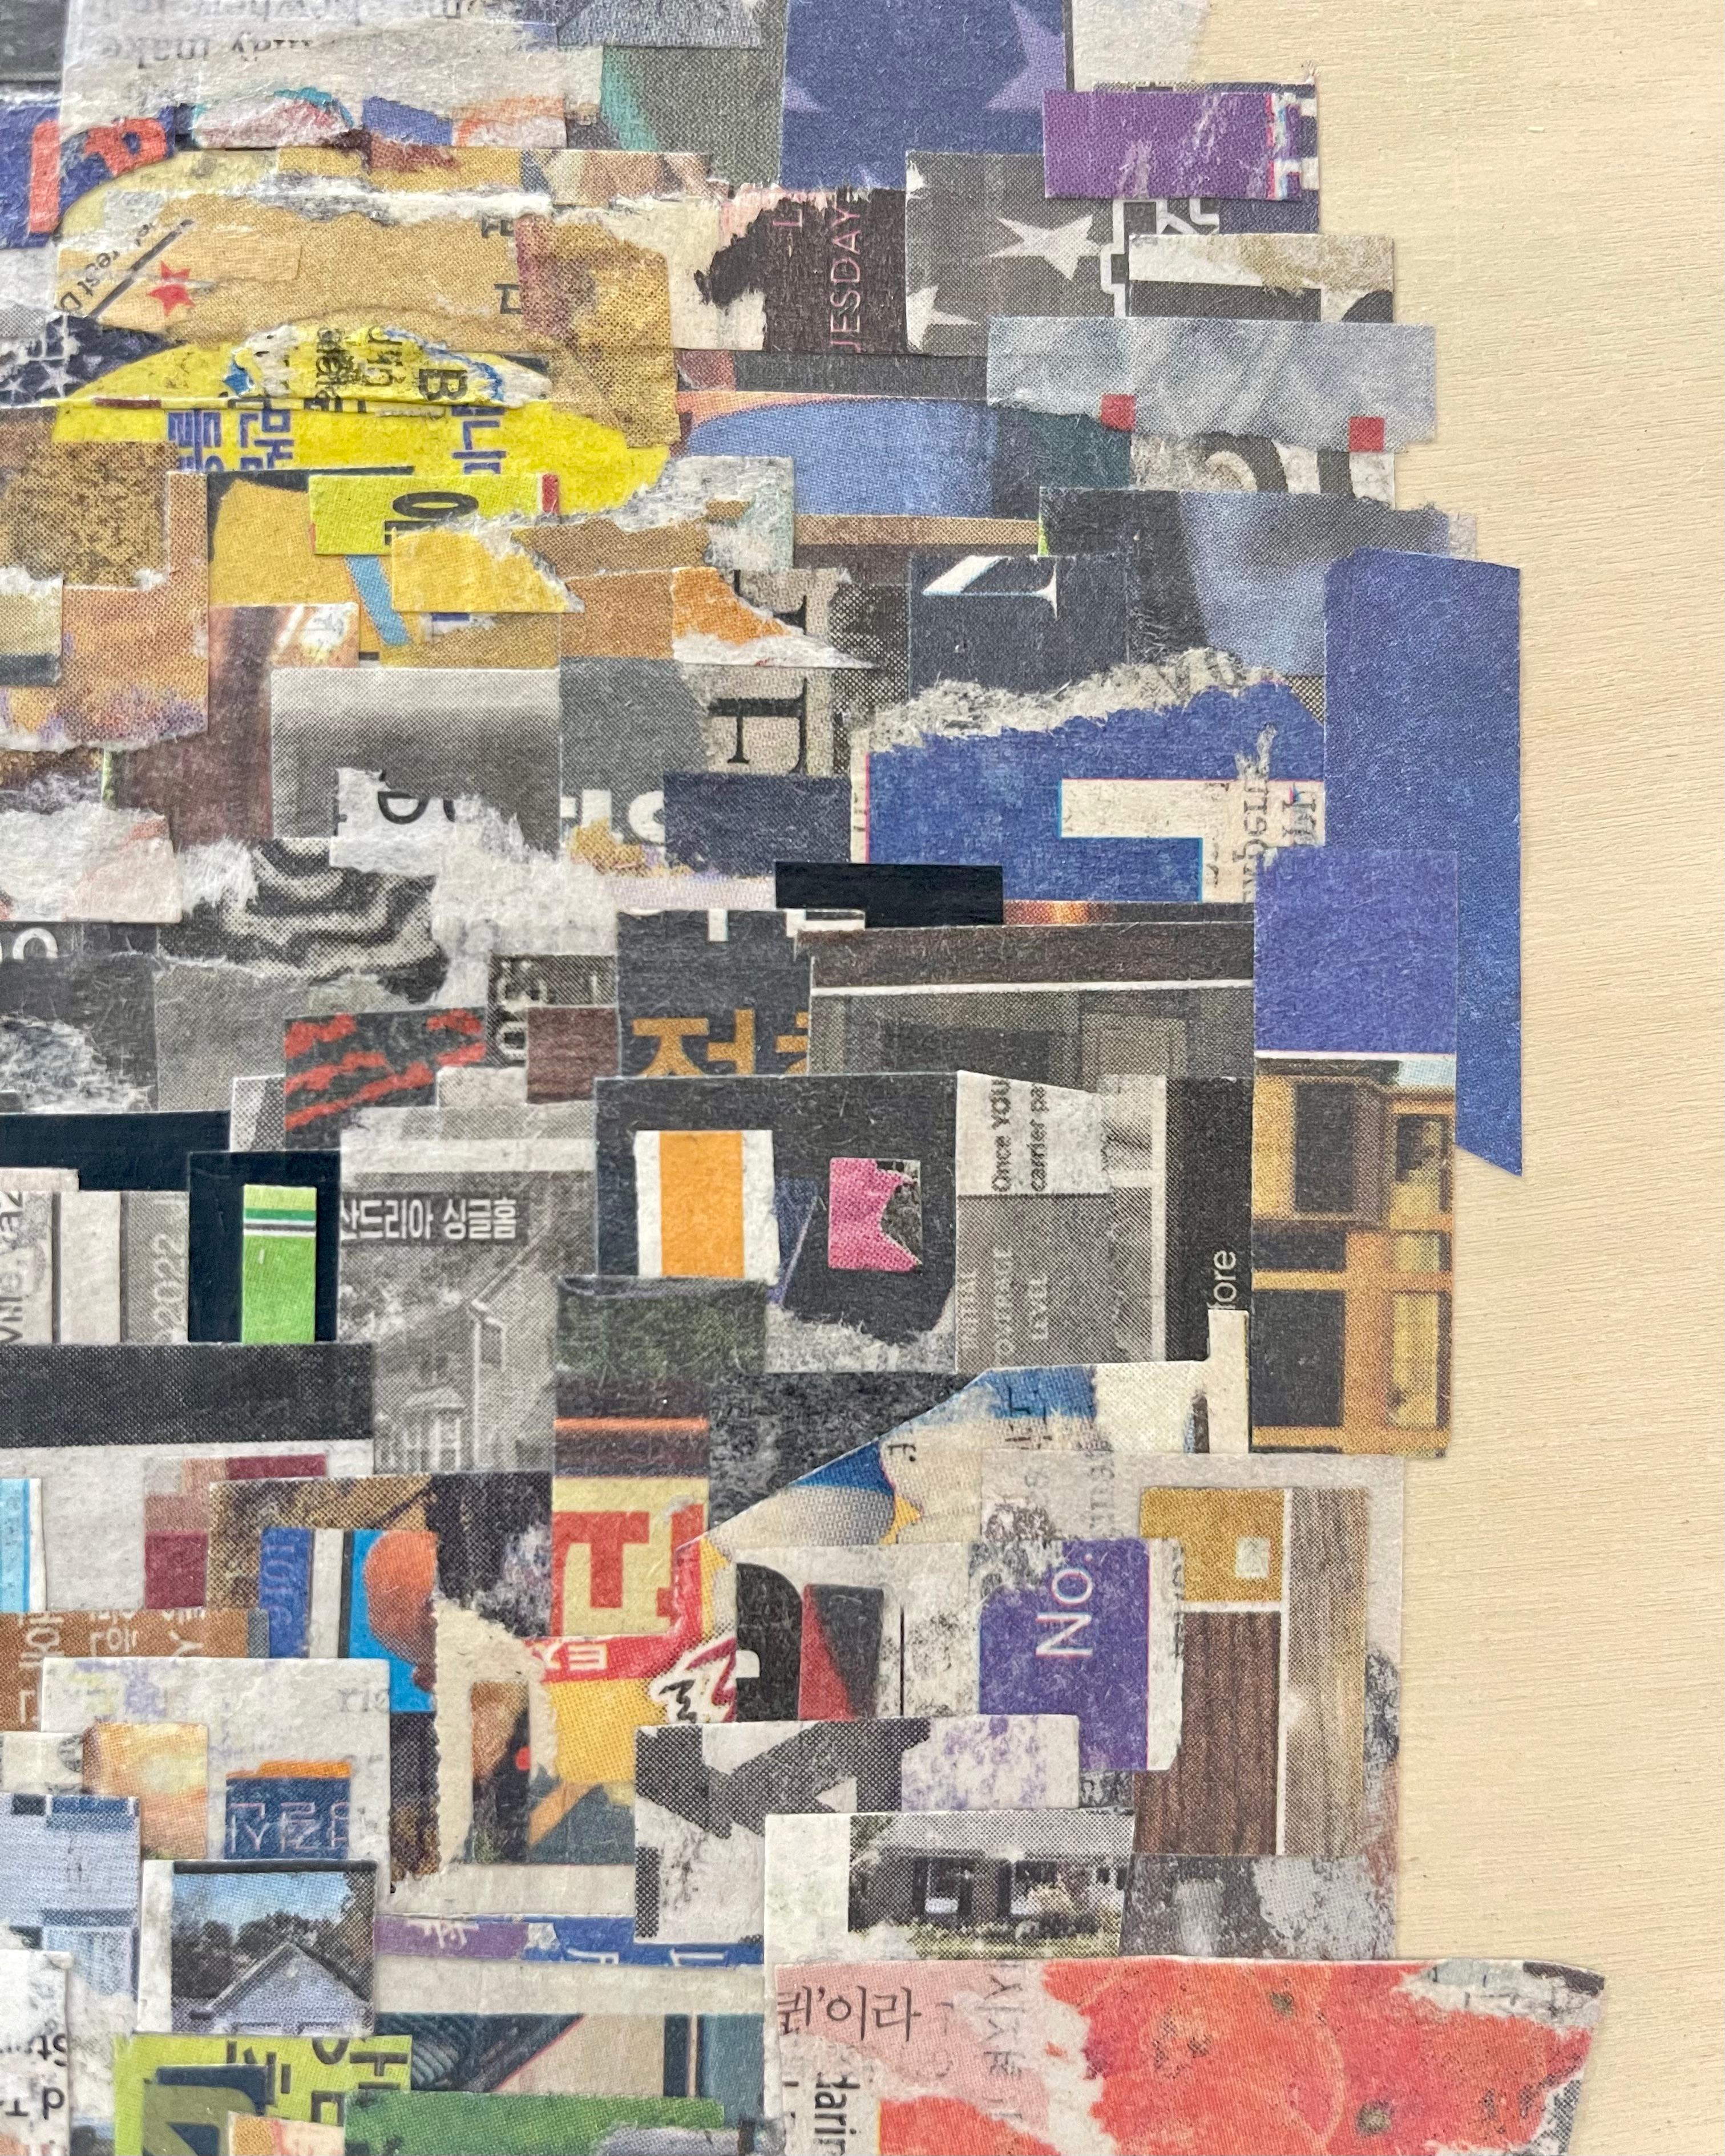 In the hands of Yeji Moon, ordinary materials are transformed into beautiful and complex collages that powerfully recall childhood nostalgia and the rapidly changing world. Inspired by her upbringing in a small neighborhood in Korea and her